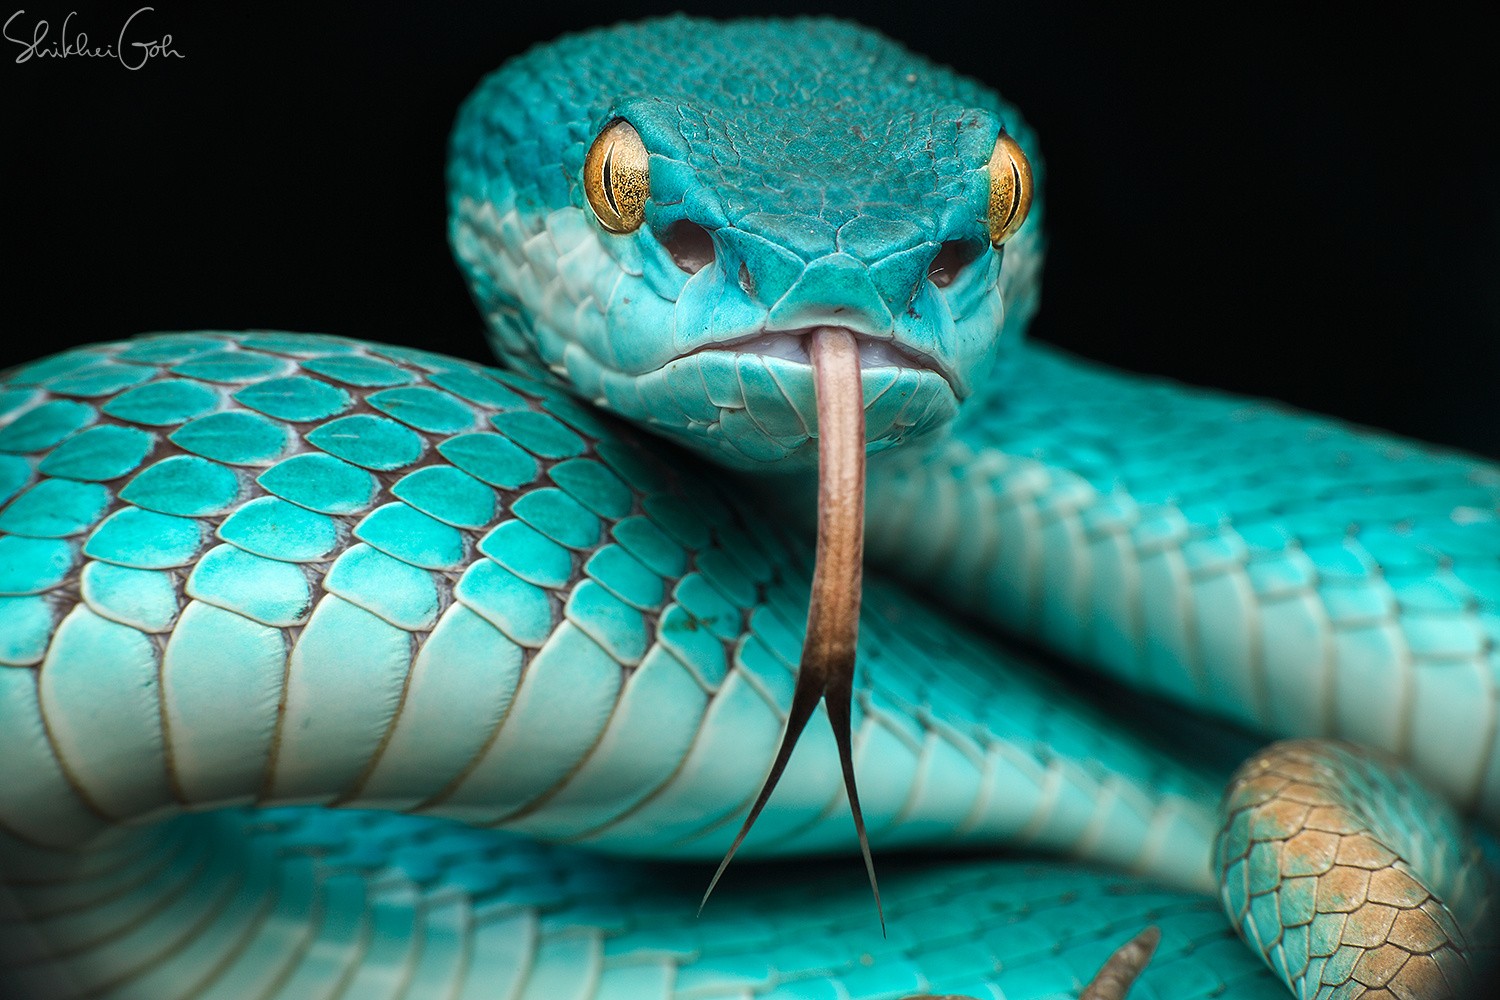 snake hd wallpaper,serpent,snake,reptile,scaled reptile,turquoise